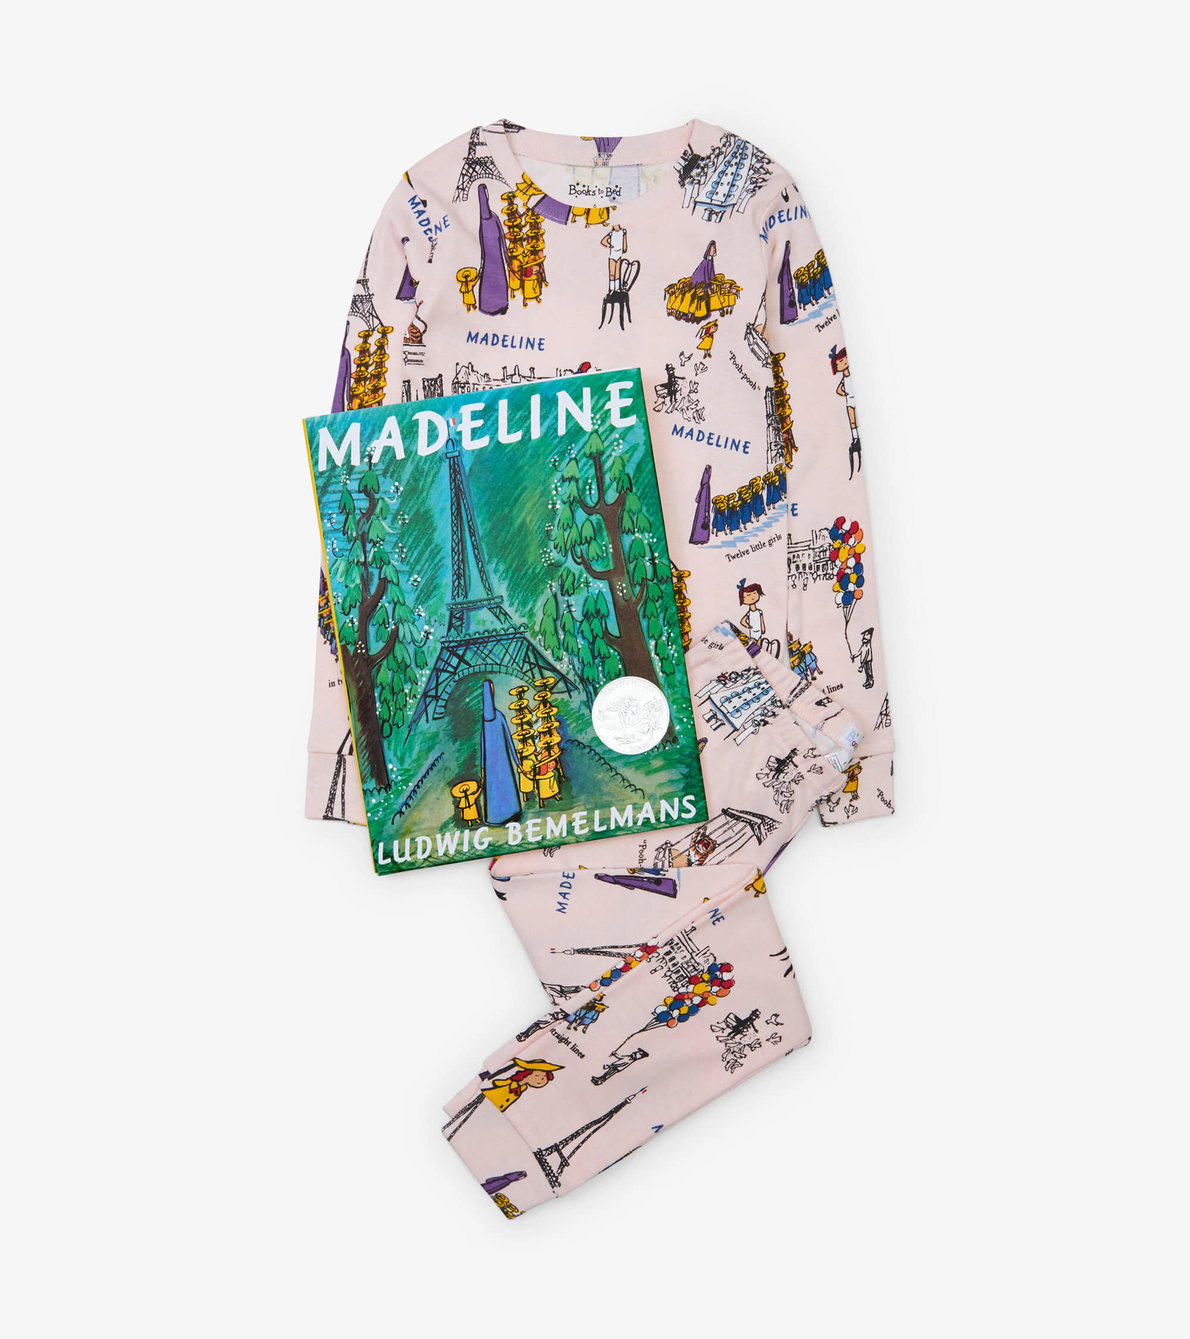 View larger image of Madeline Book and Pajama Set